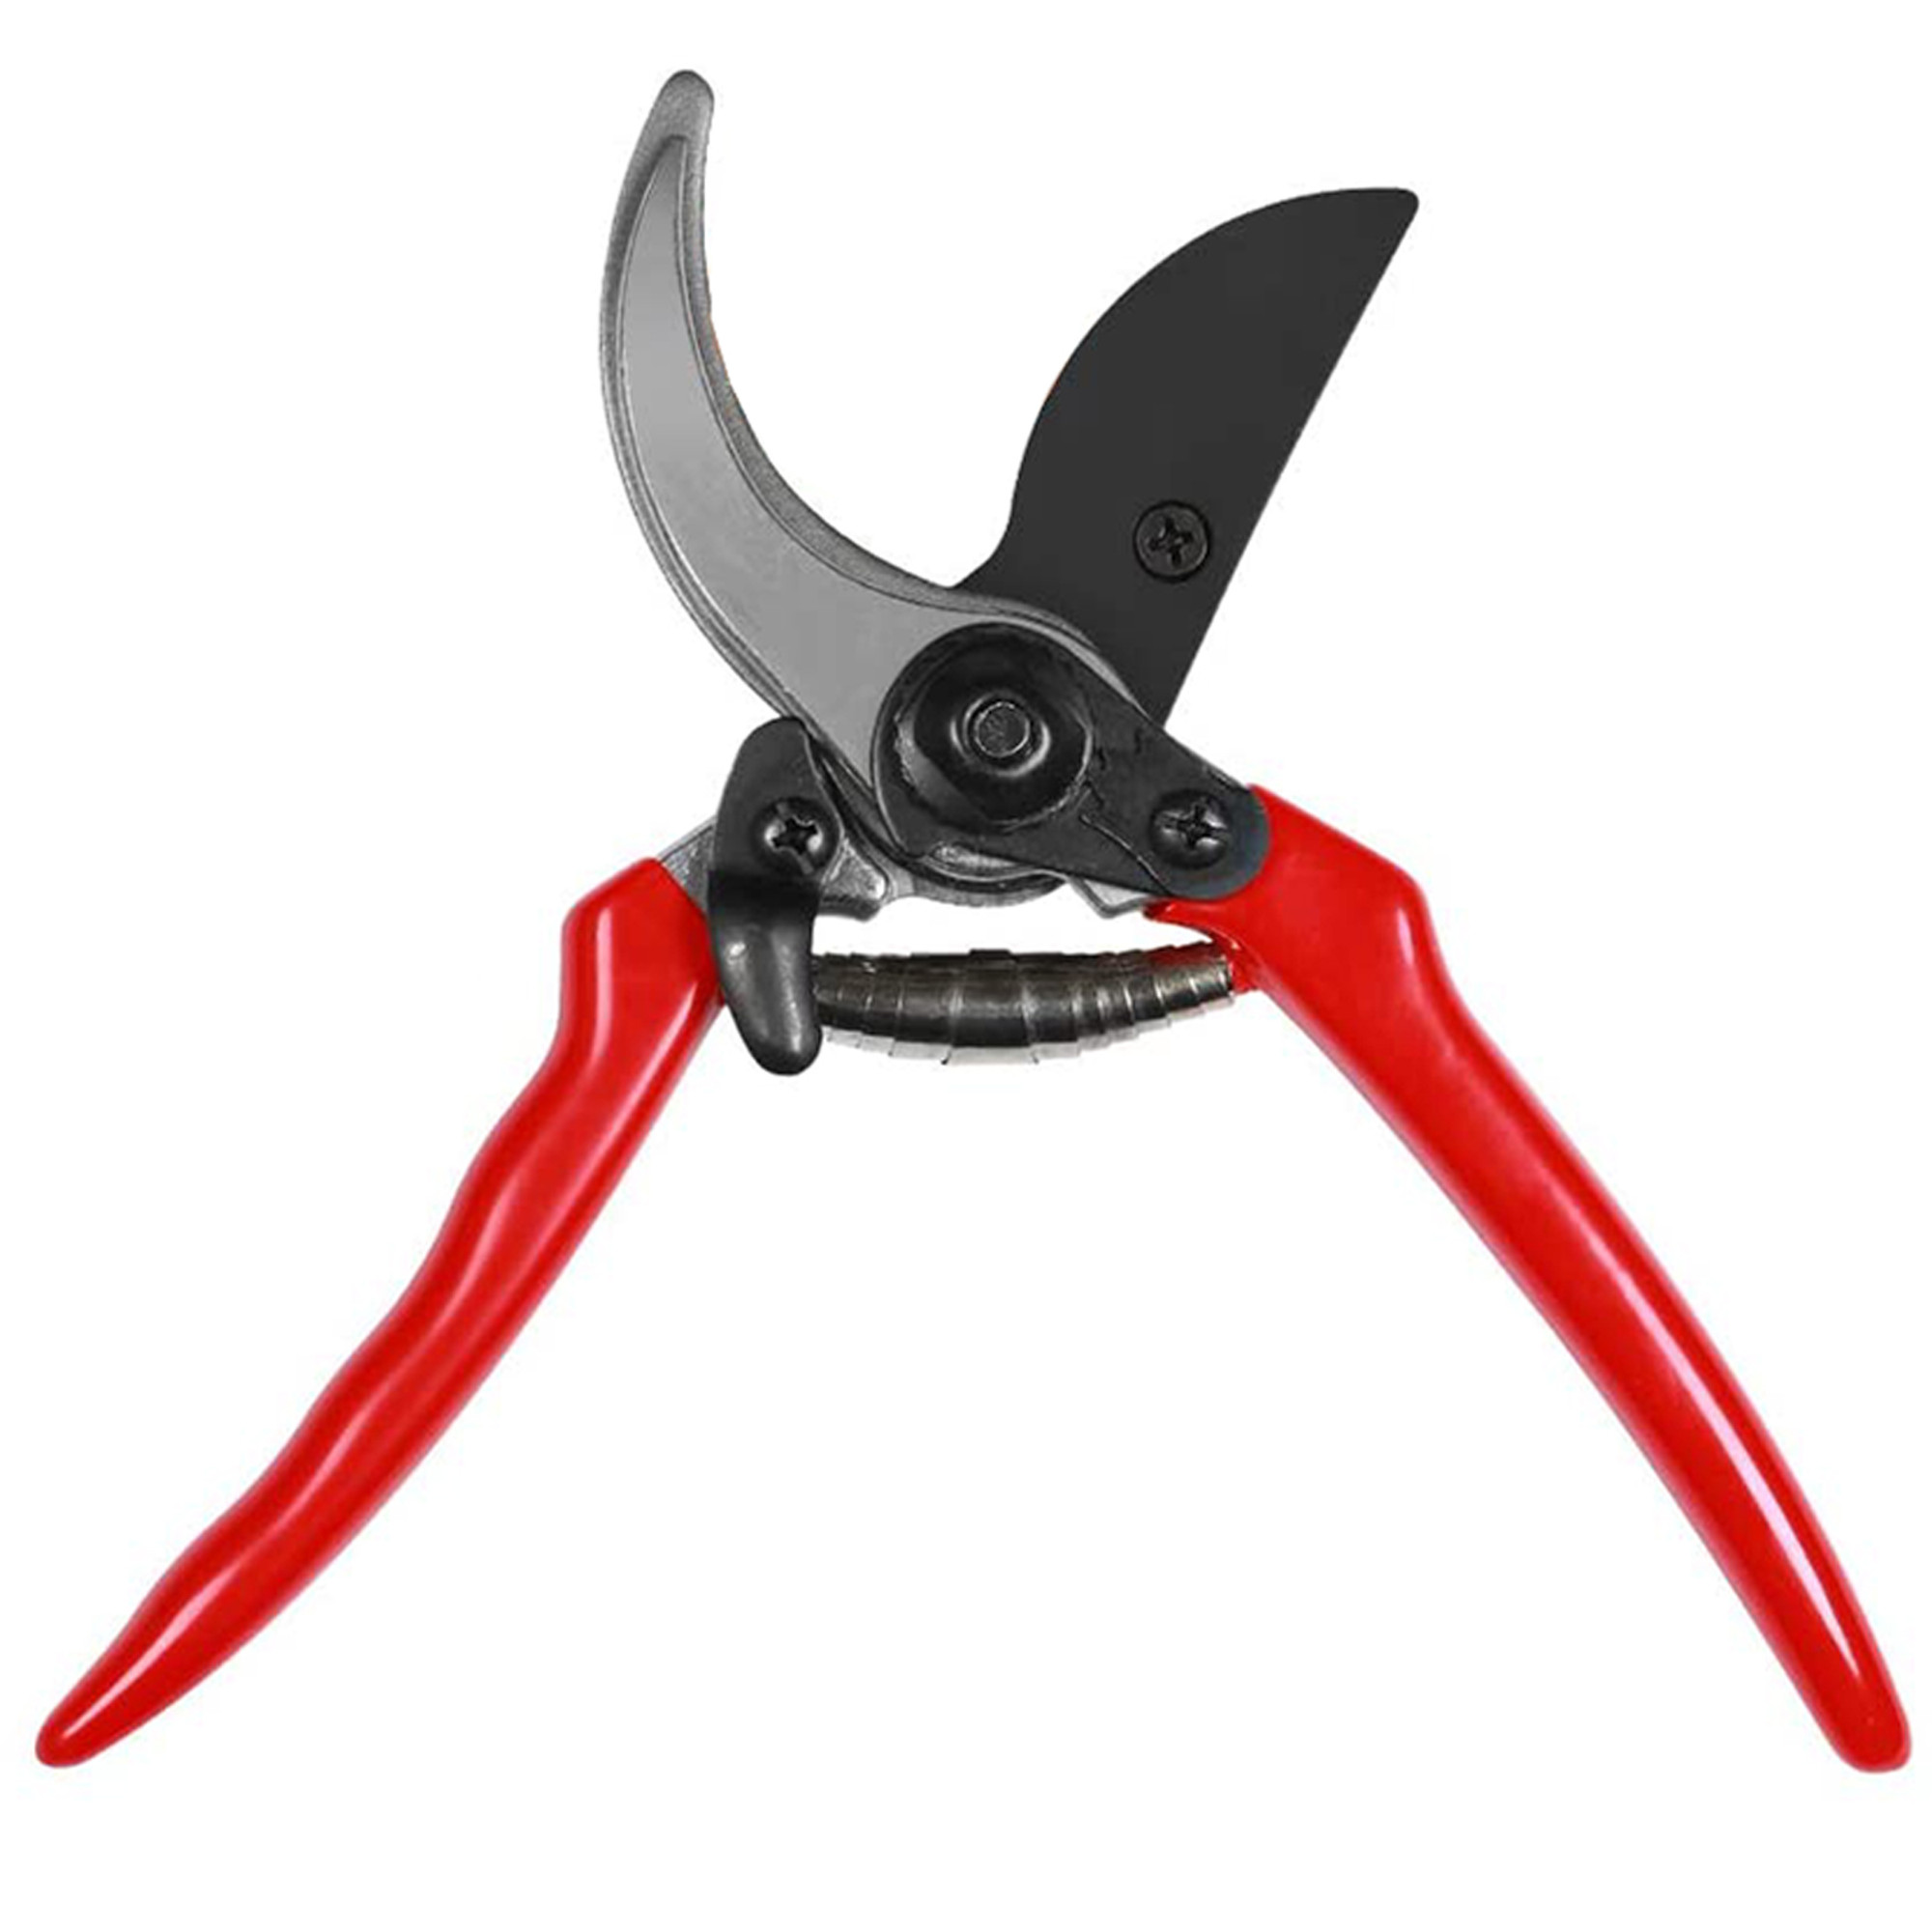 https://cdn11.bigcommerce.com/s-f0j9ofpmpu/images/stencil/2000x2000/products/219041/743690/7in%20professional%20garden%20hand%20pruners%20%20red%201__82461.1630607244.jpg?c=2